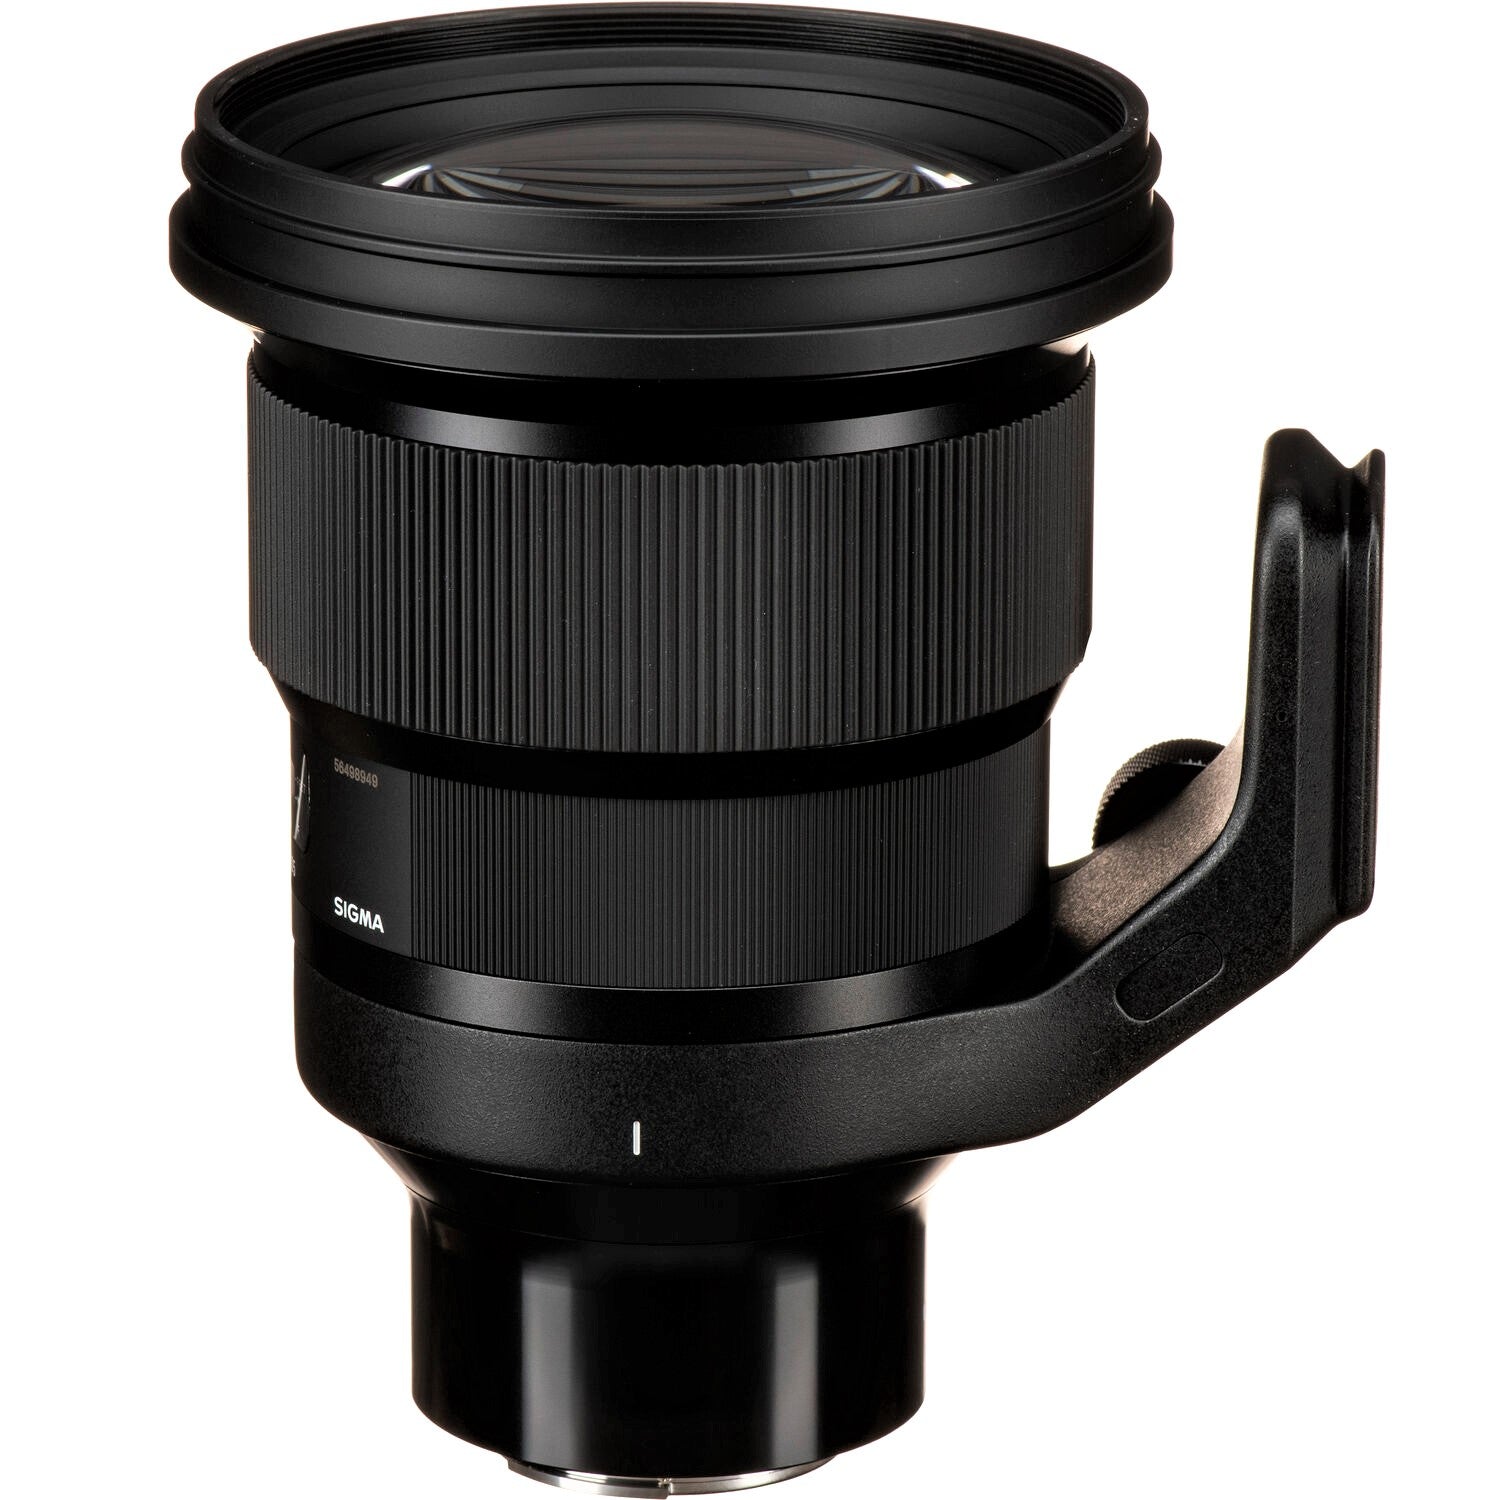 Sigma 105mm F1.4 DG HSM Art Lens for Sony E with Attached Tripod Collar on the Right Side